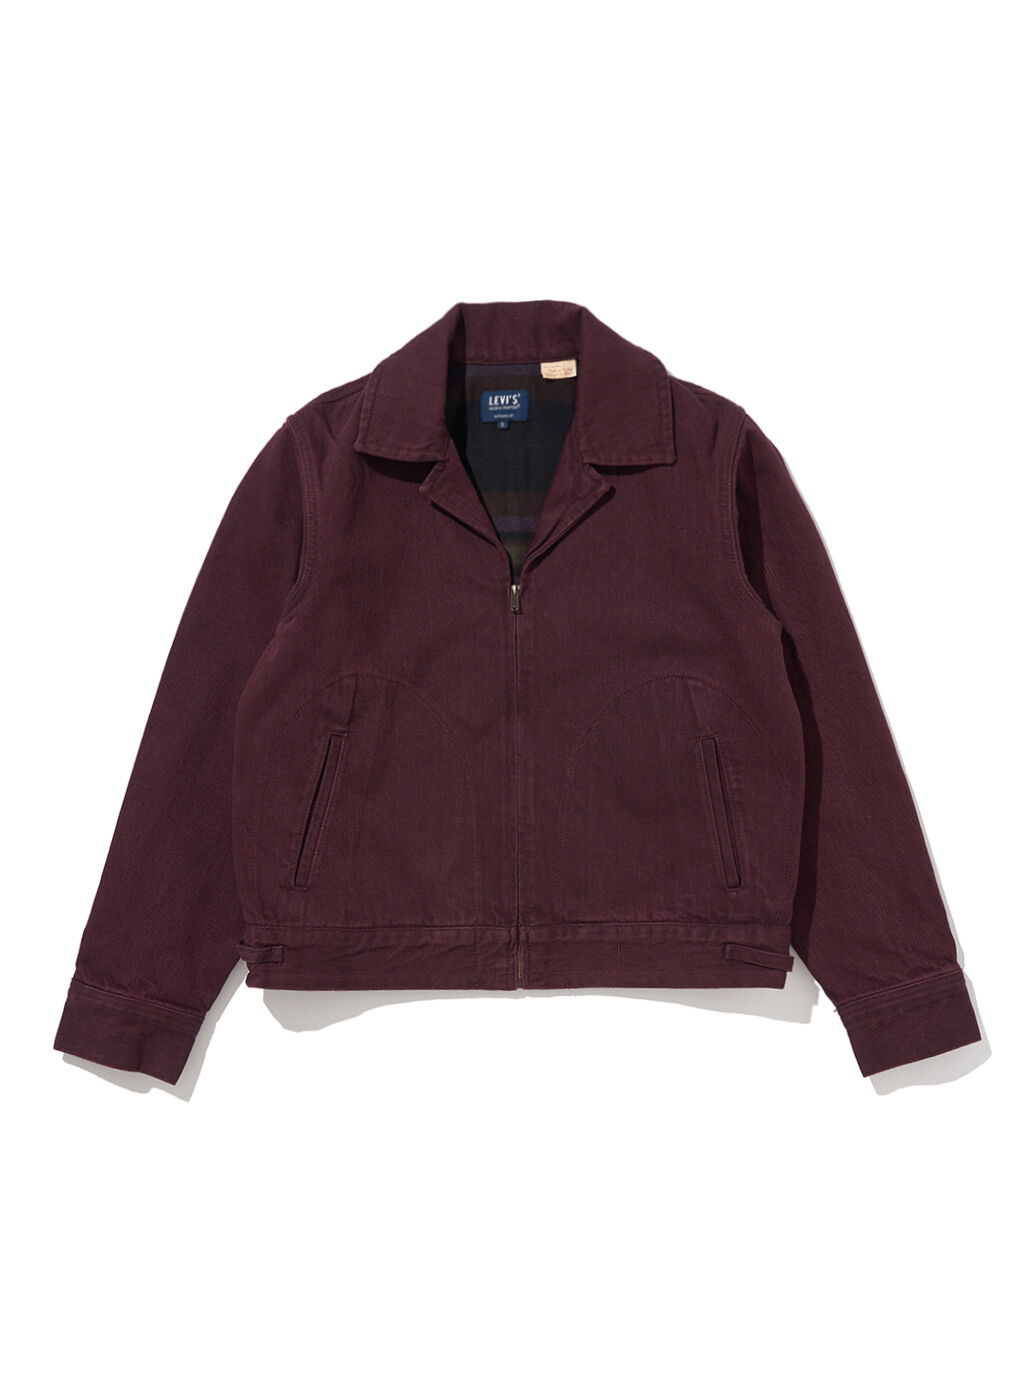 LEVI'S® MADE&CRAFTED®LMC MECHANIC JACKET｜リーバイス® 公式通販